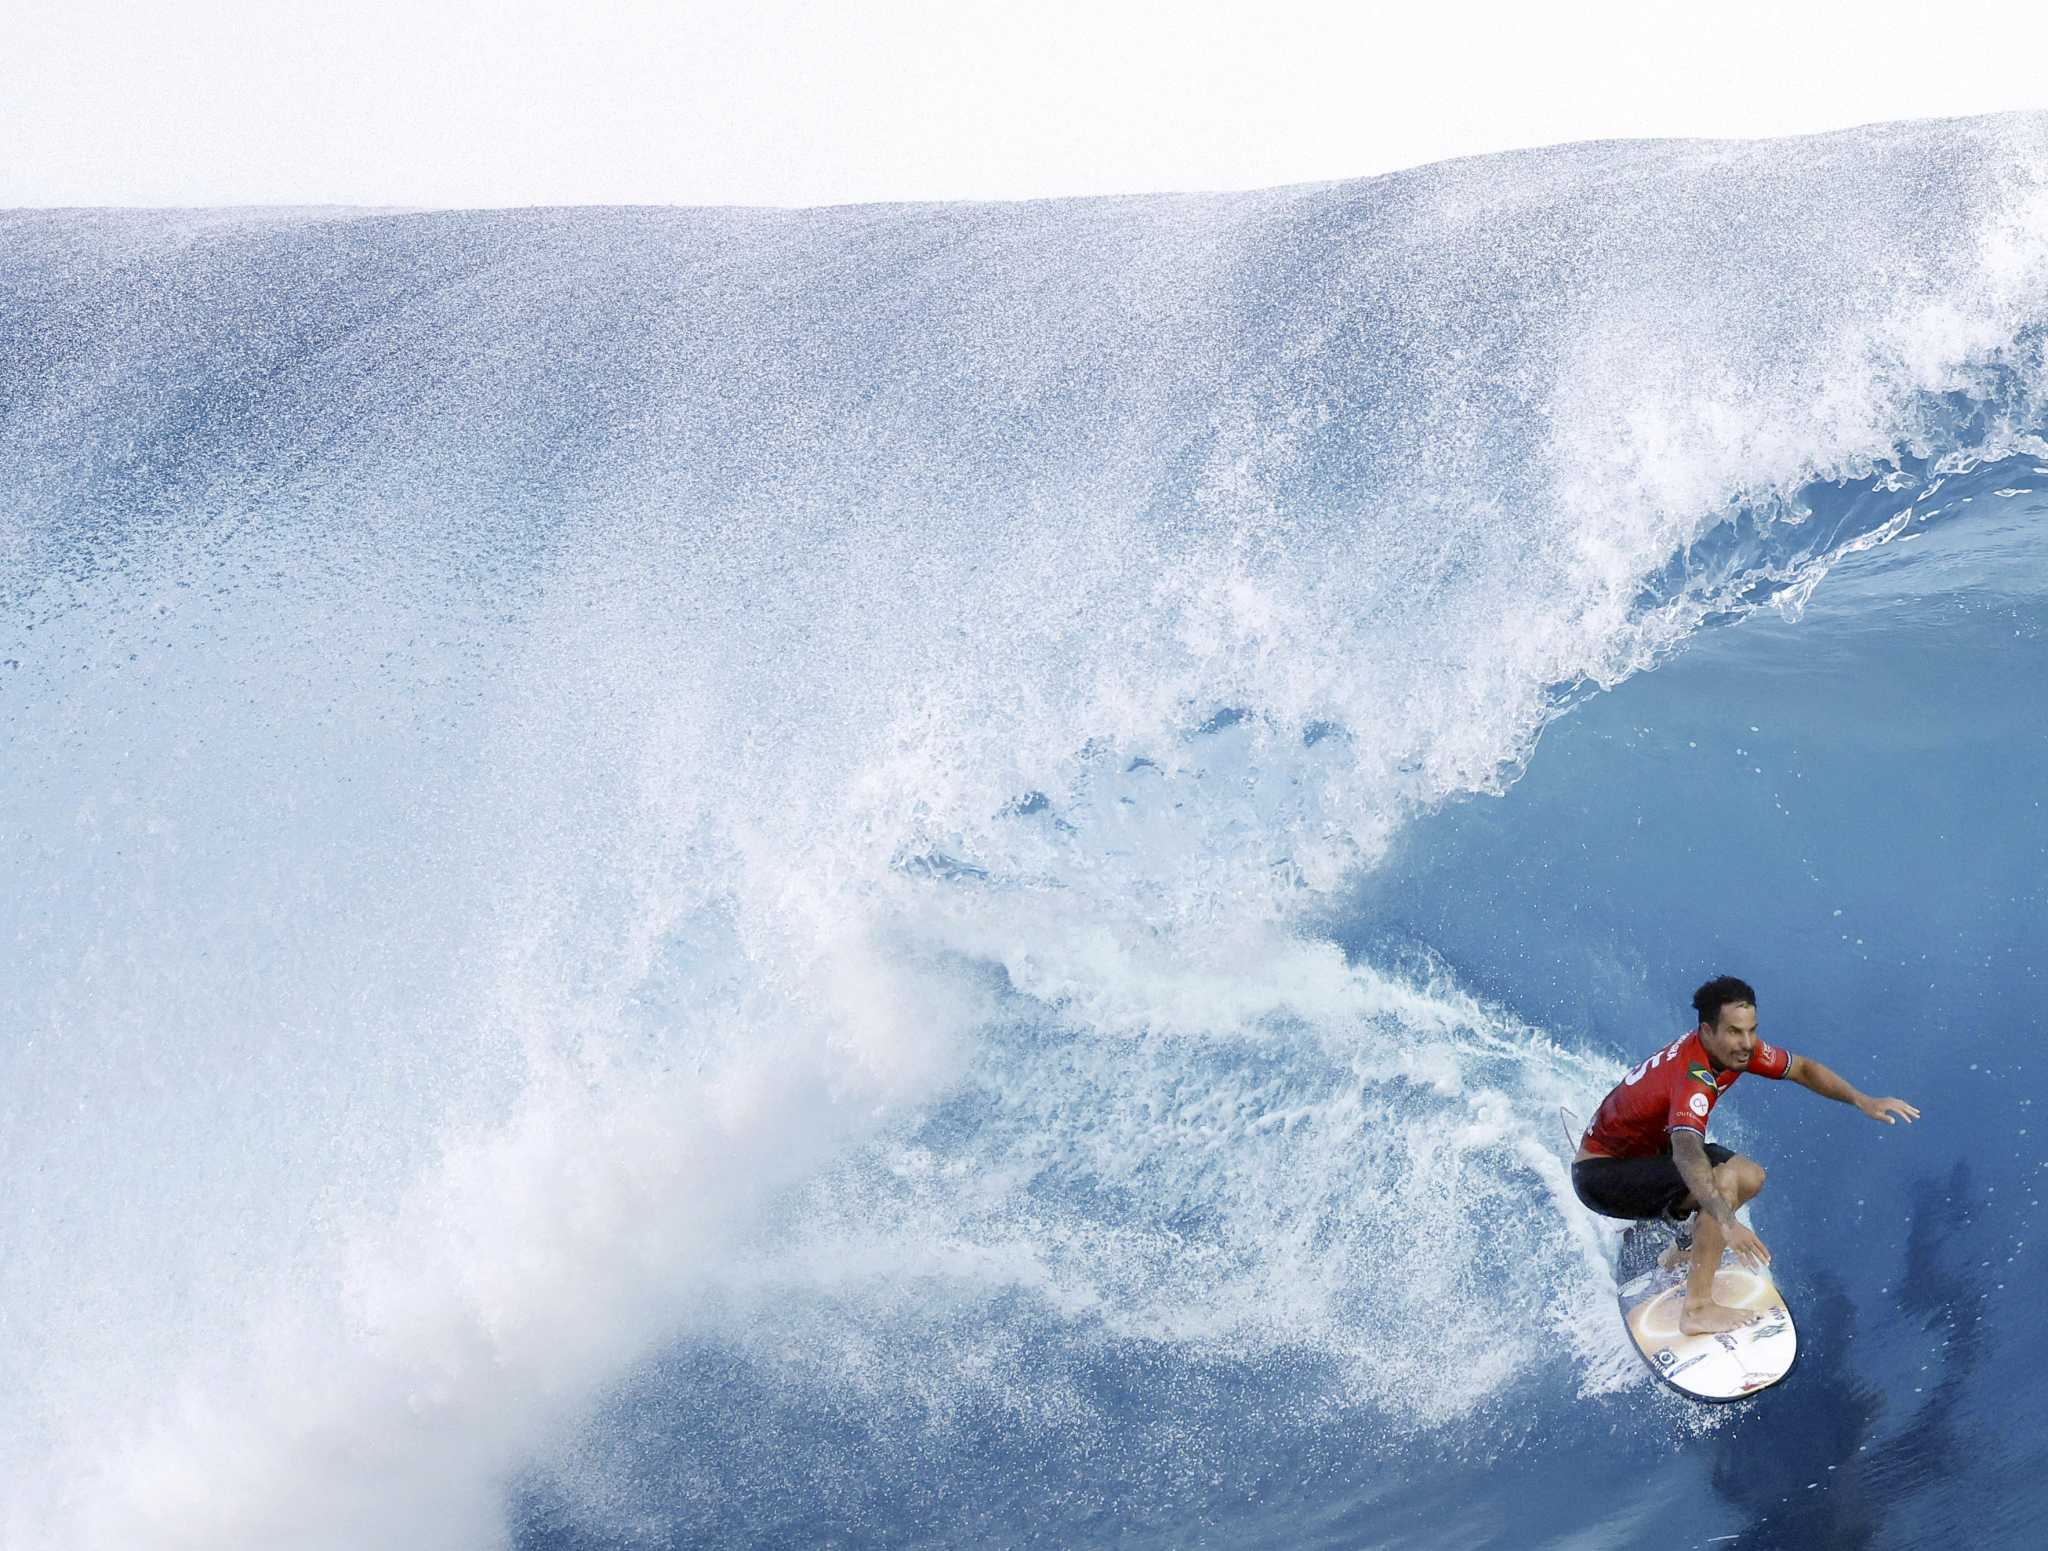 Surfers get 'best waves of our lives' at dress rehearsal for Olympic venue in Tahiti